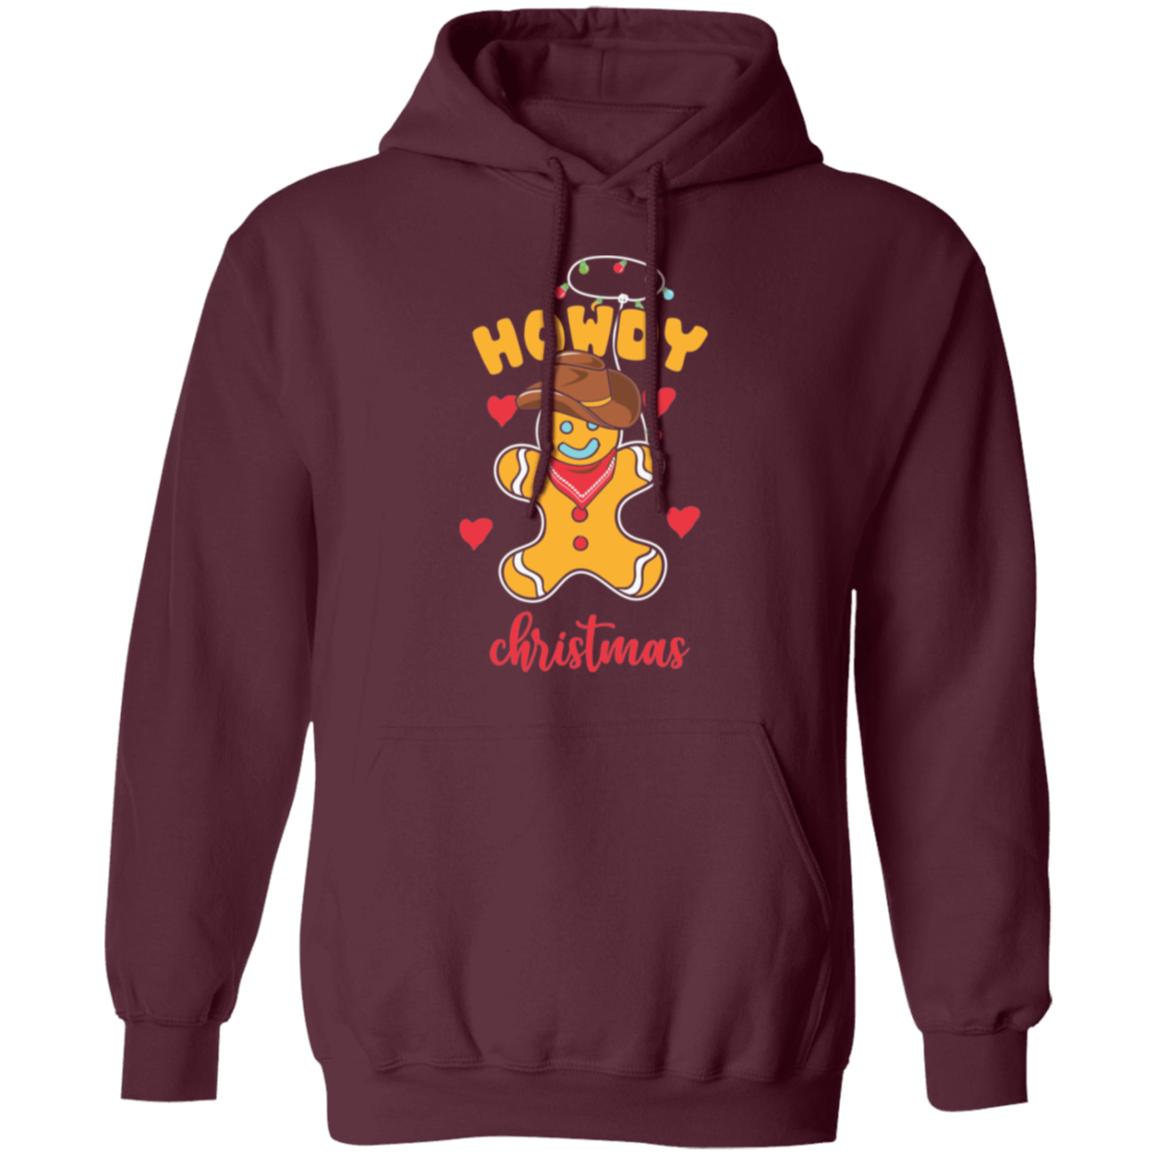 Howdy Christmas - Unisex Pullover Hoodie